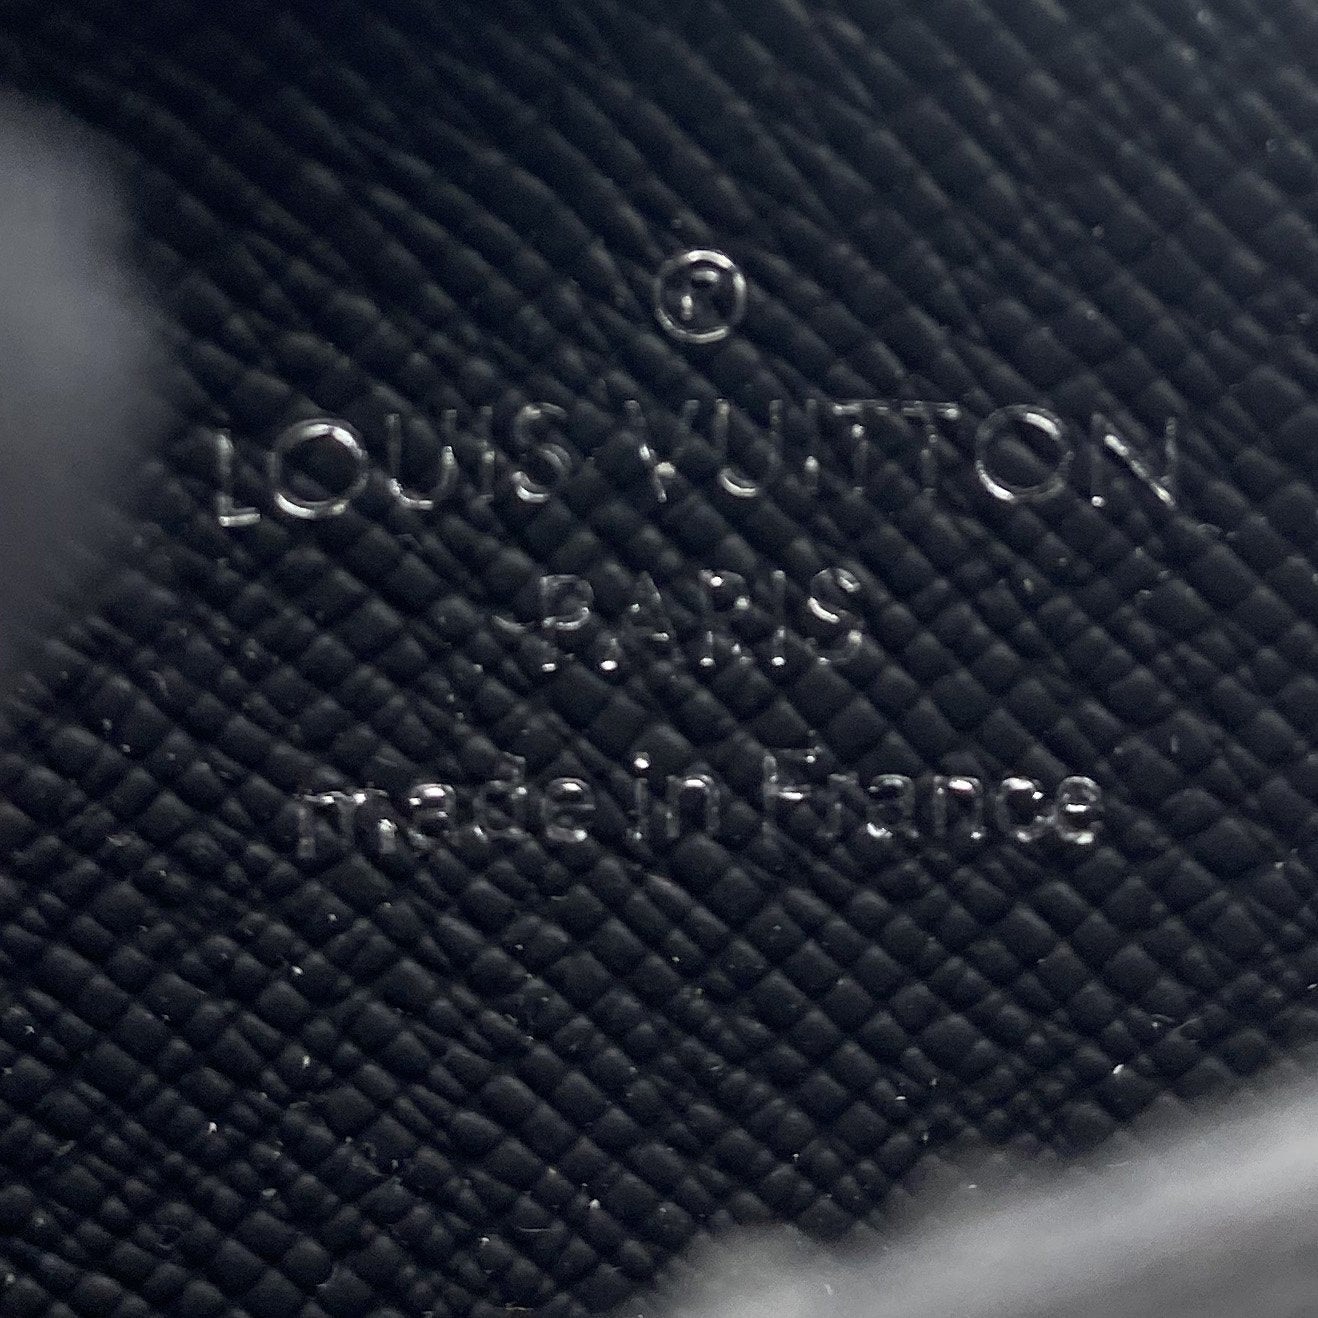 Louis Vuitton Monogram Eclipse Canvas Double Card Holder Made in